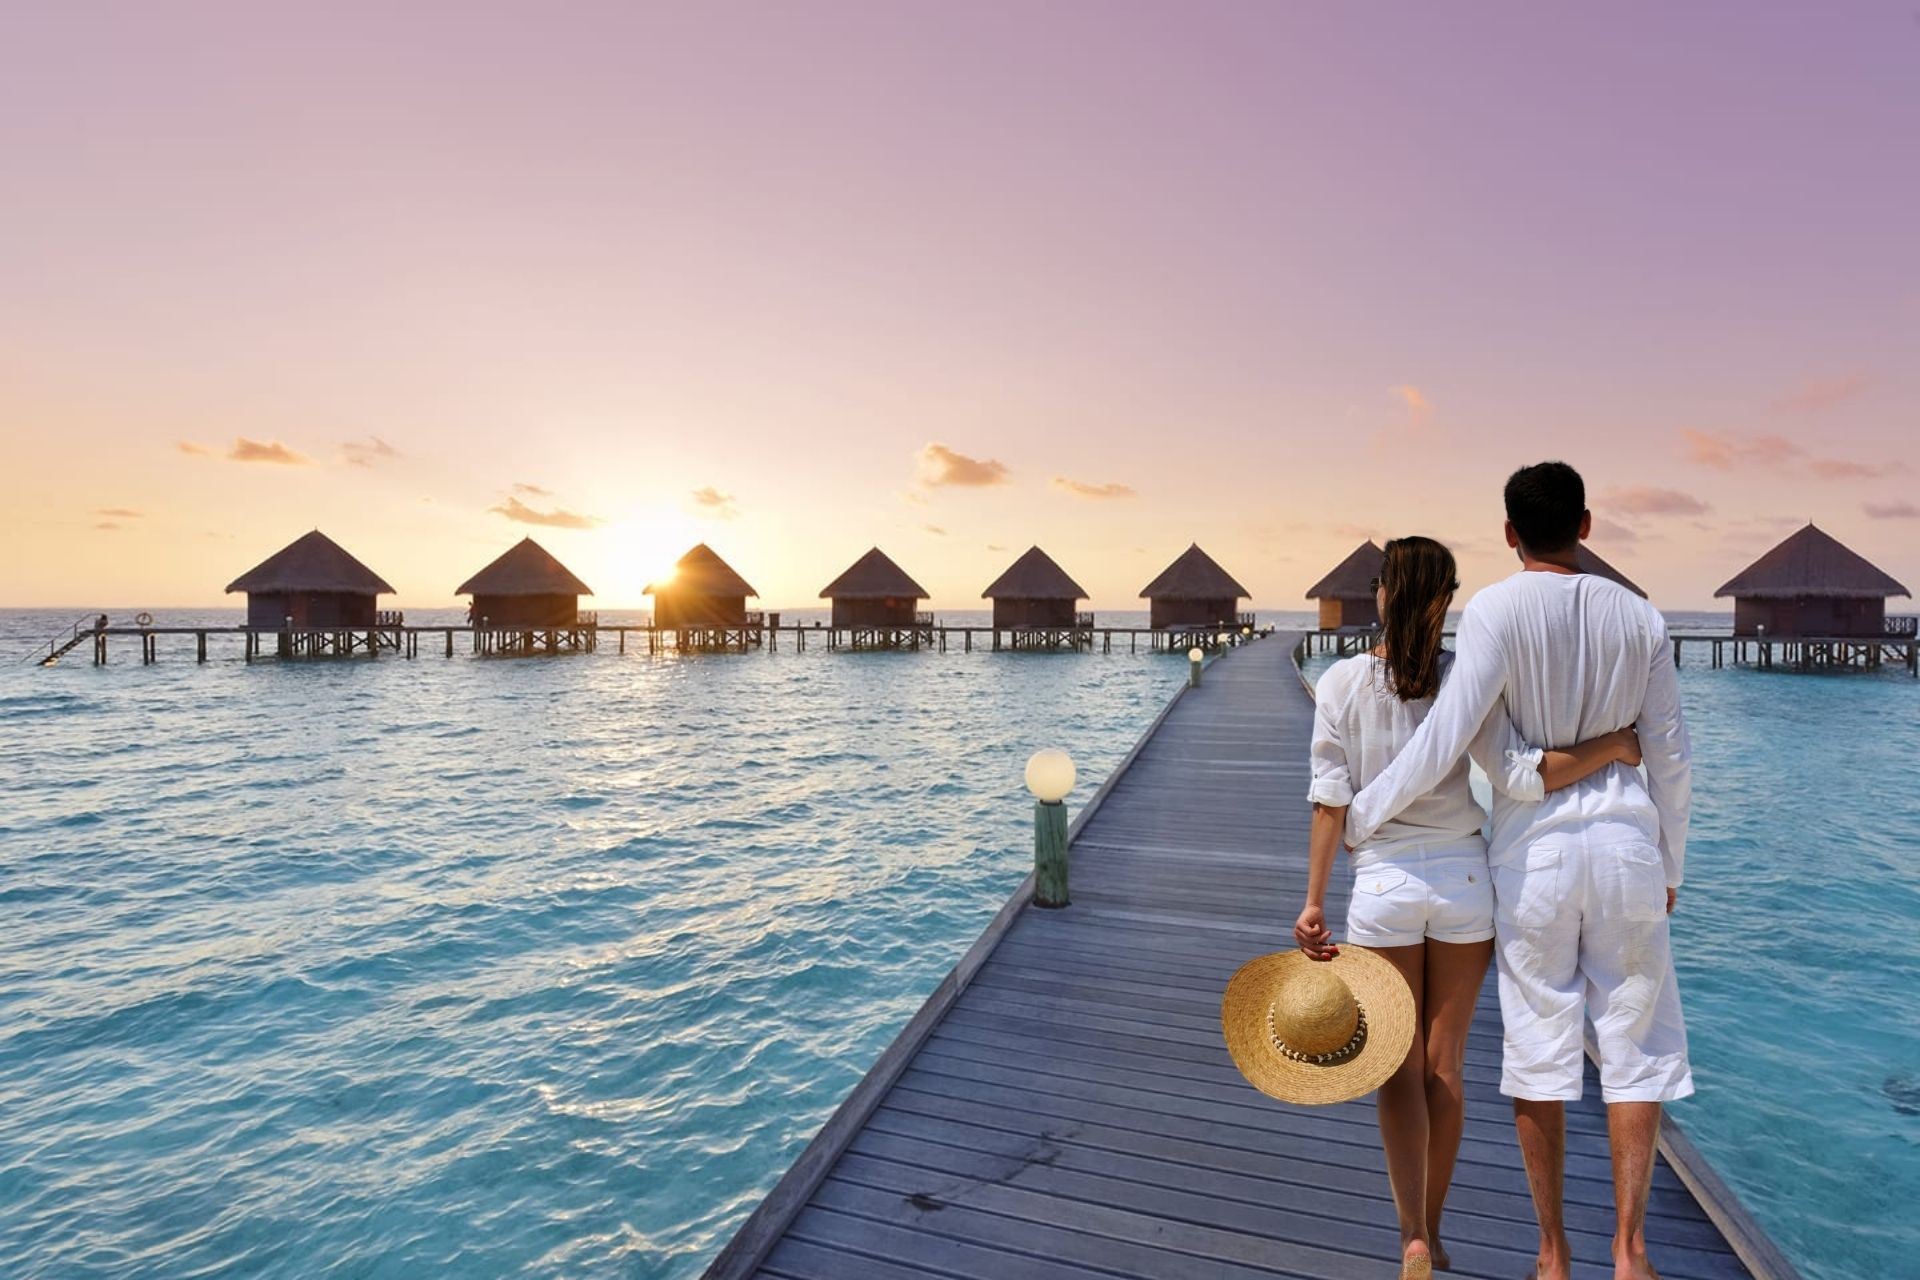 maldives trip cost for couple from pakistan